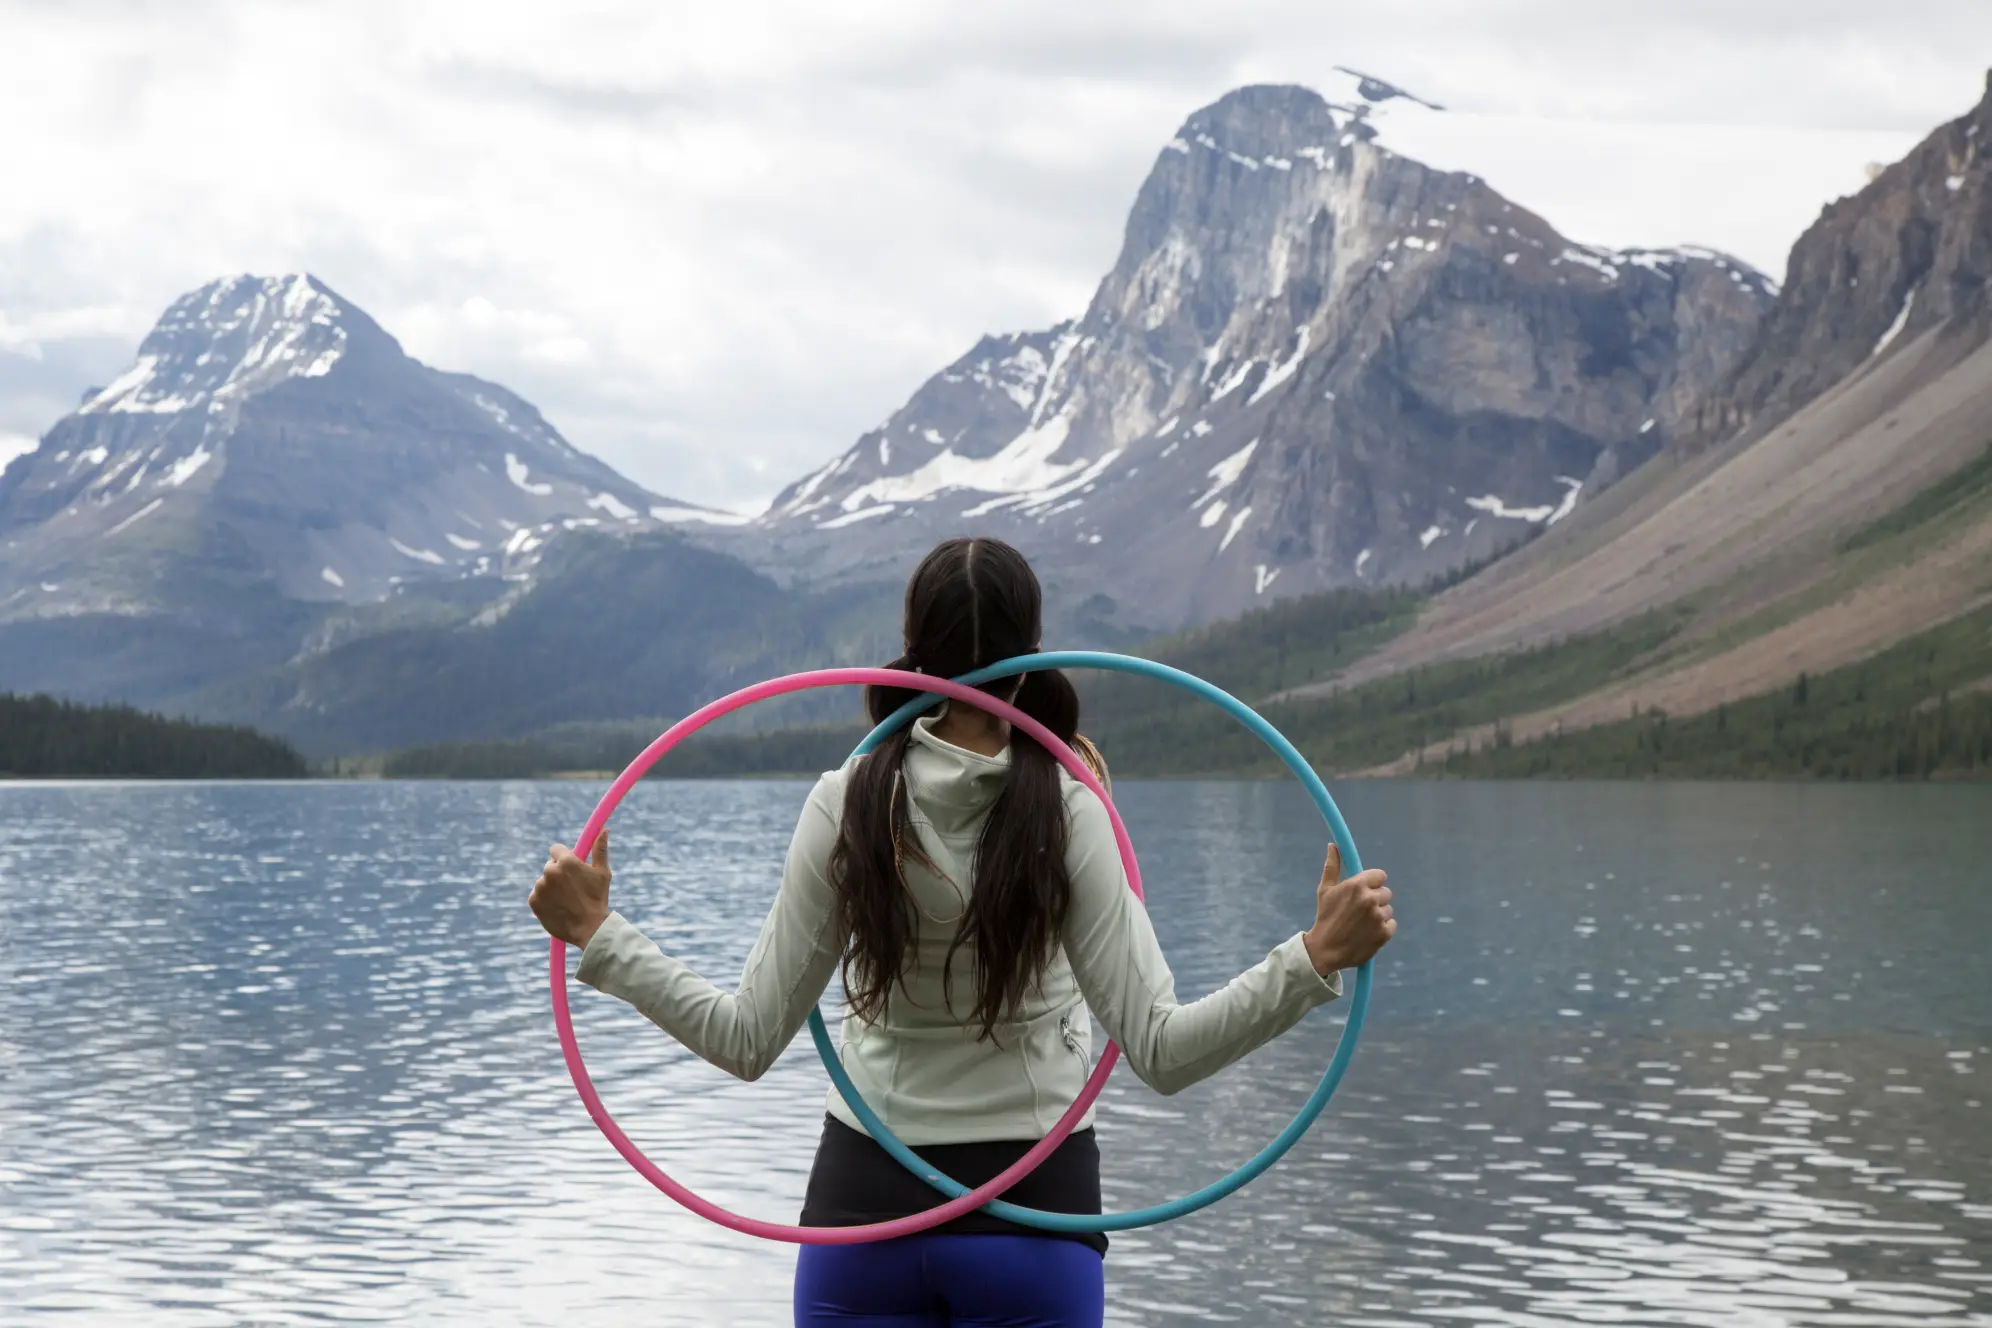 Person with two long pigtails and a blue and pink hoola-hoop standing in front of a lake with mountains in the background